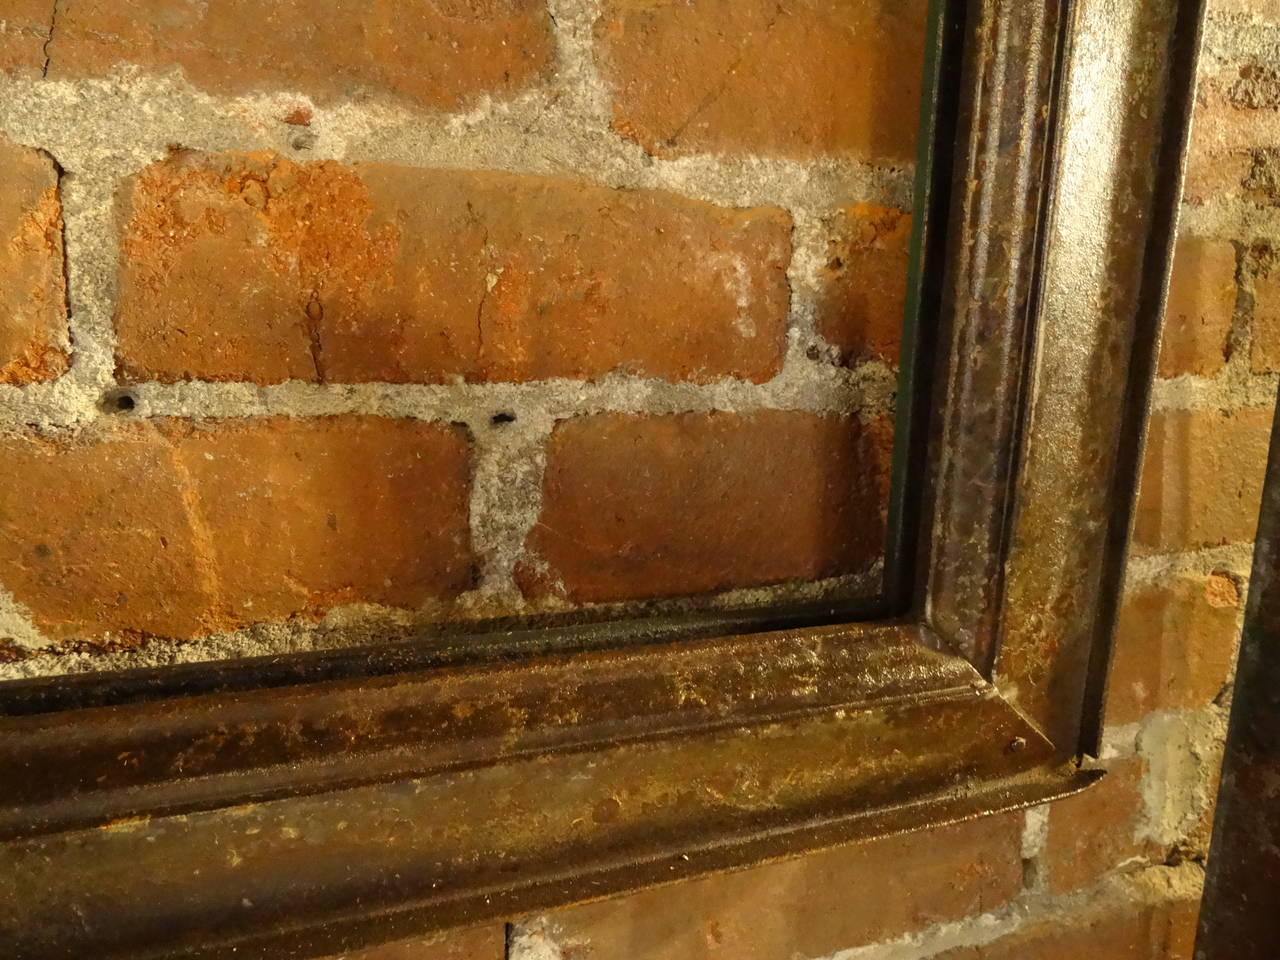 Galvanized steel window salvaged from an old Catholic school.   One side, as shown, has original hardware-hinges, chain and pulley.  Other side has formed steel, looking like crown molding, perfect for a frame.  Windows displayed are just examples